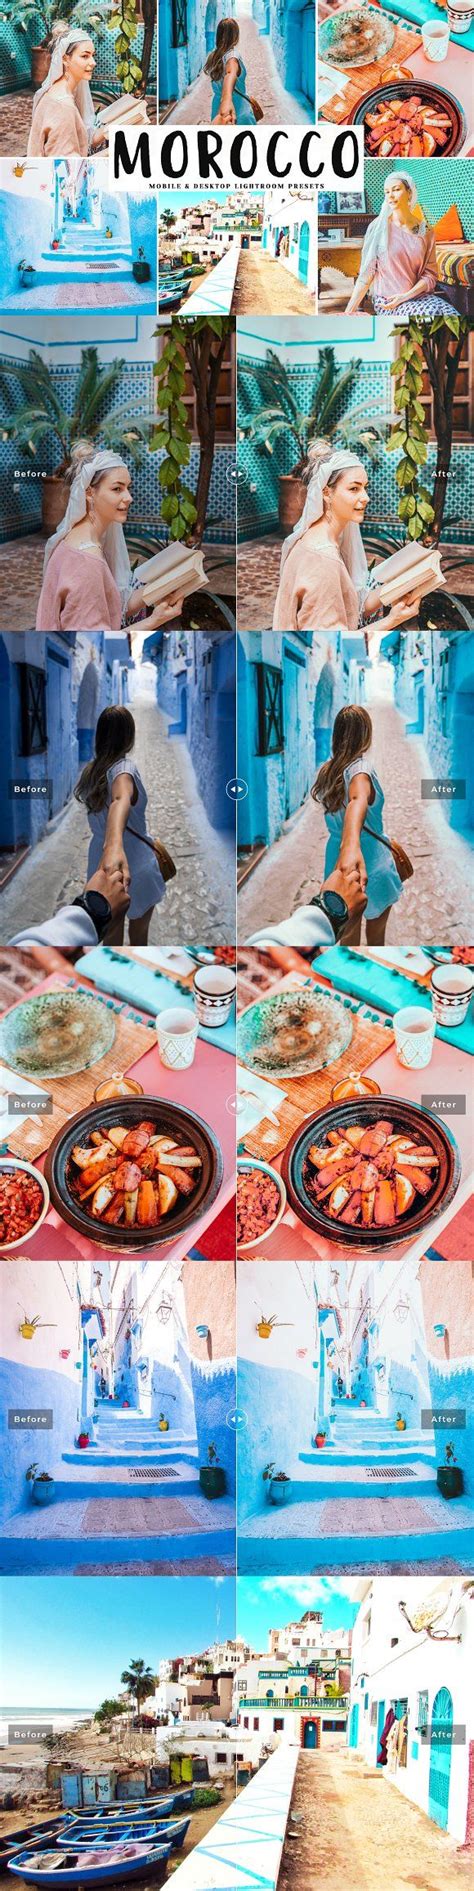 Free raw images for retouching. Morocco Lightroom Presets Pack by Creativetacos #morocco # ...